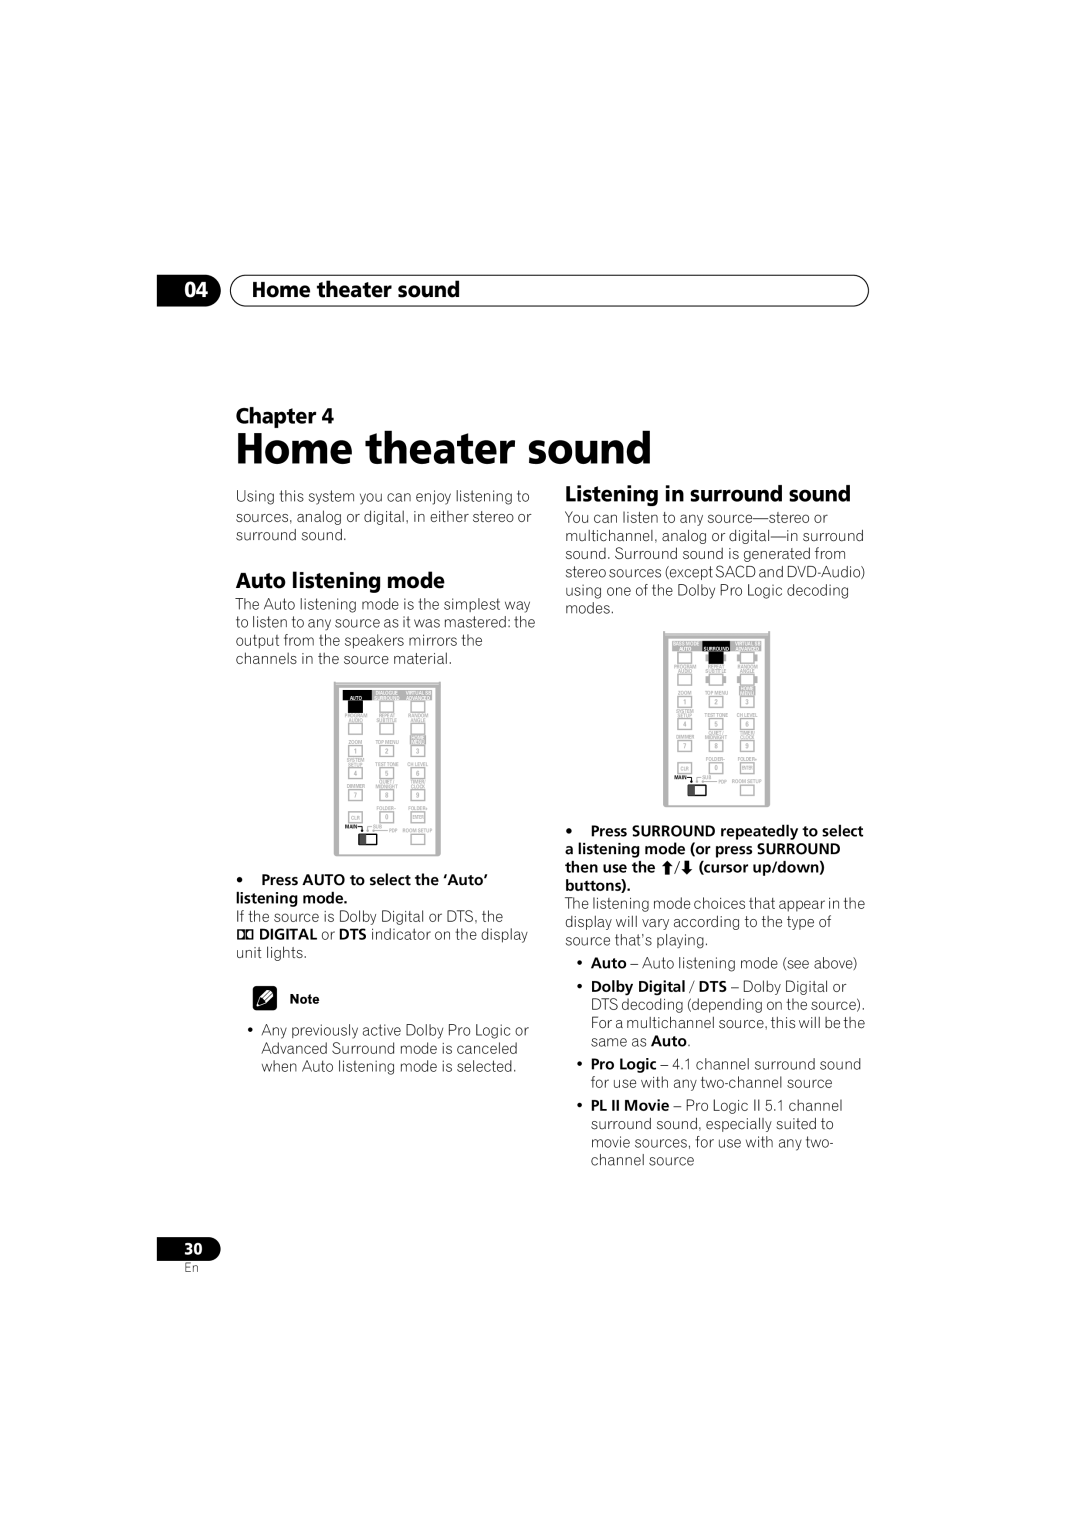 Pioneer S-DV990ST, S-DV99ST manual 04Home theater sound Chapter, Auto listening mode, Listening in surround sound 